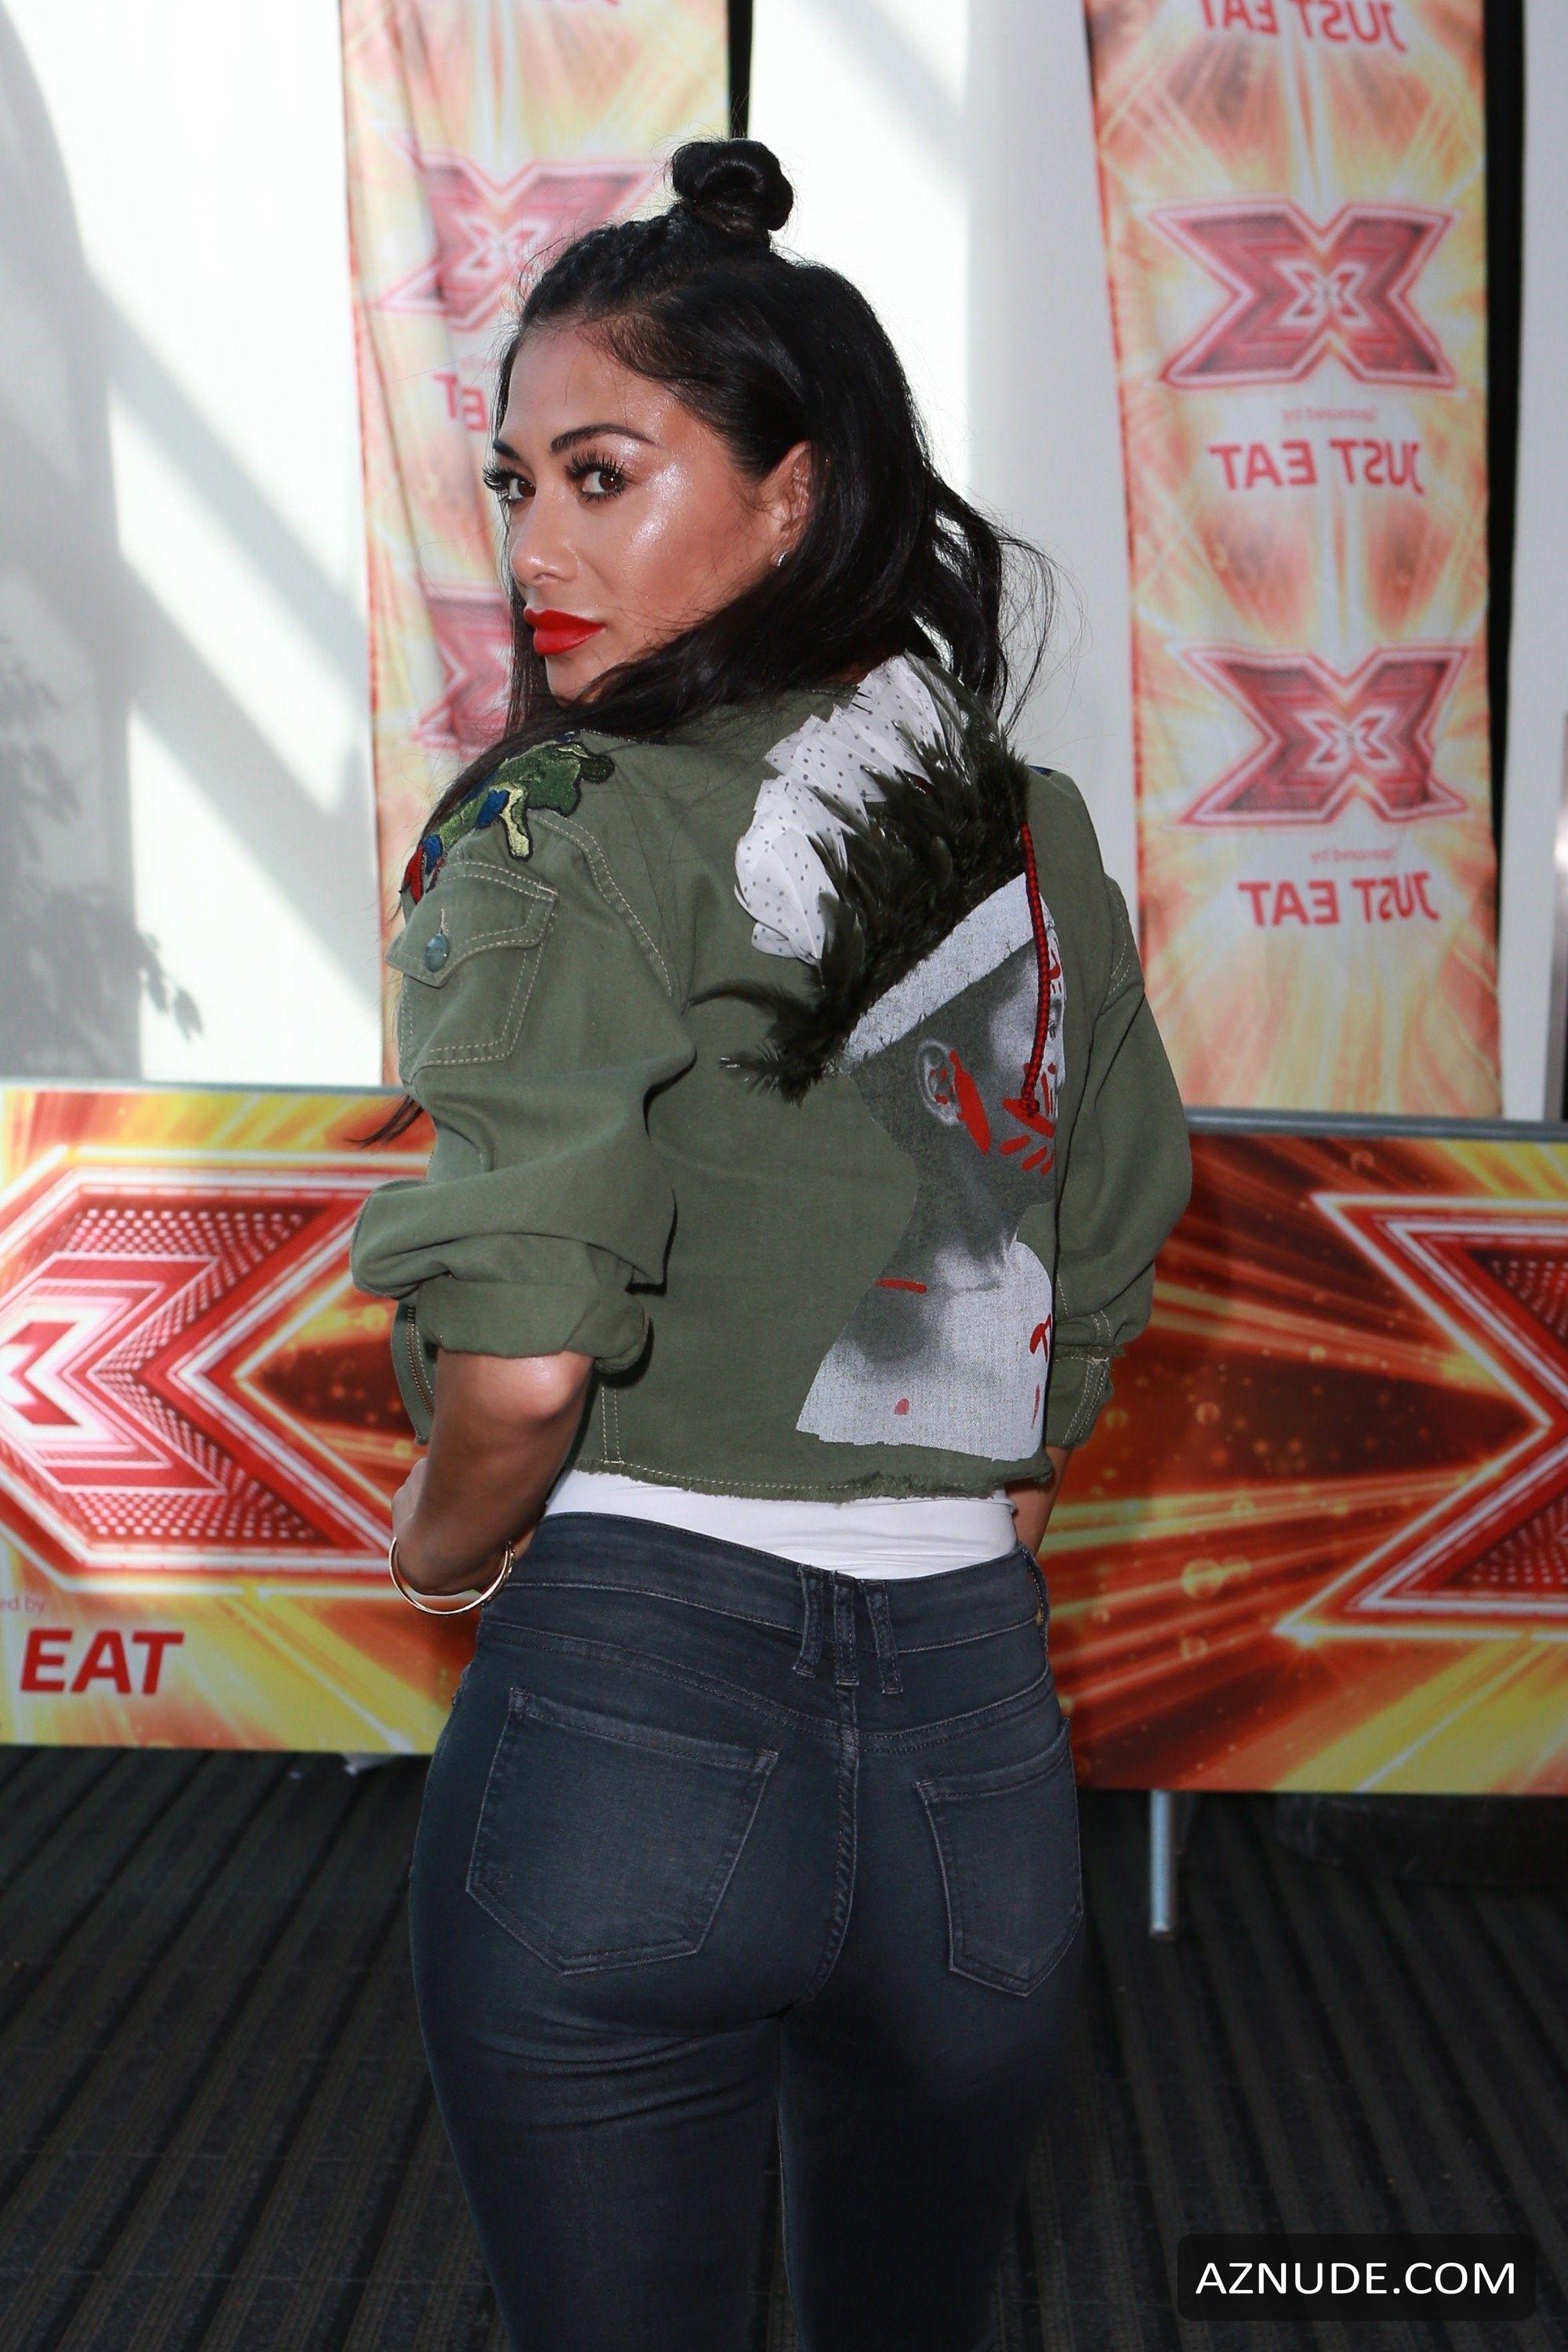 Nicole Scherzinger Sexy In Tight Jeans As She Attends At The X Factor 3383